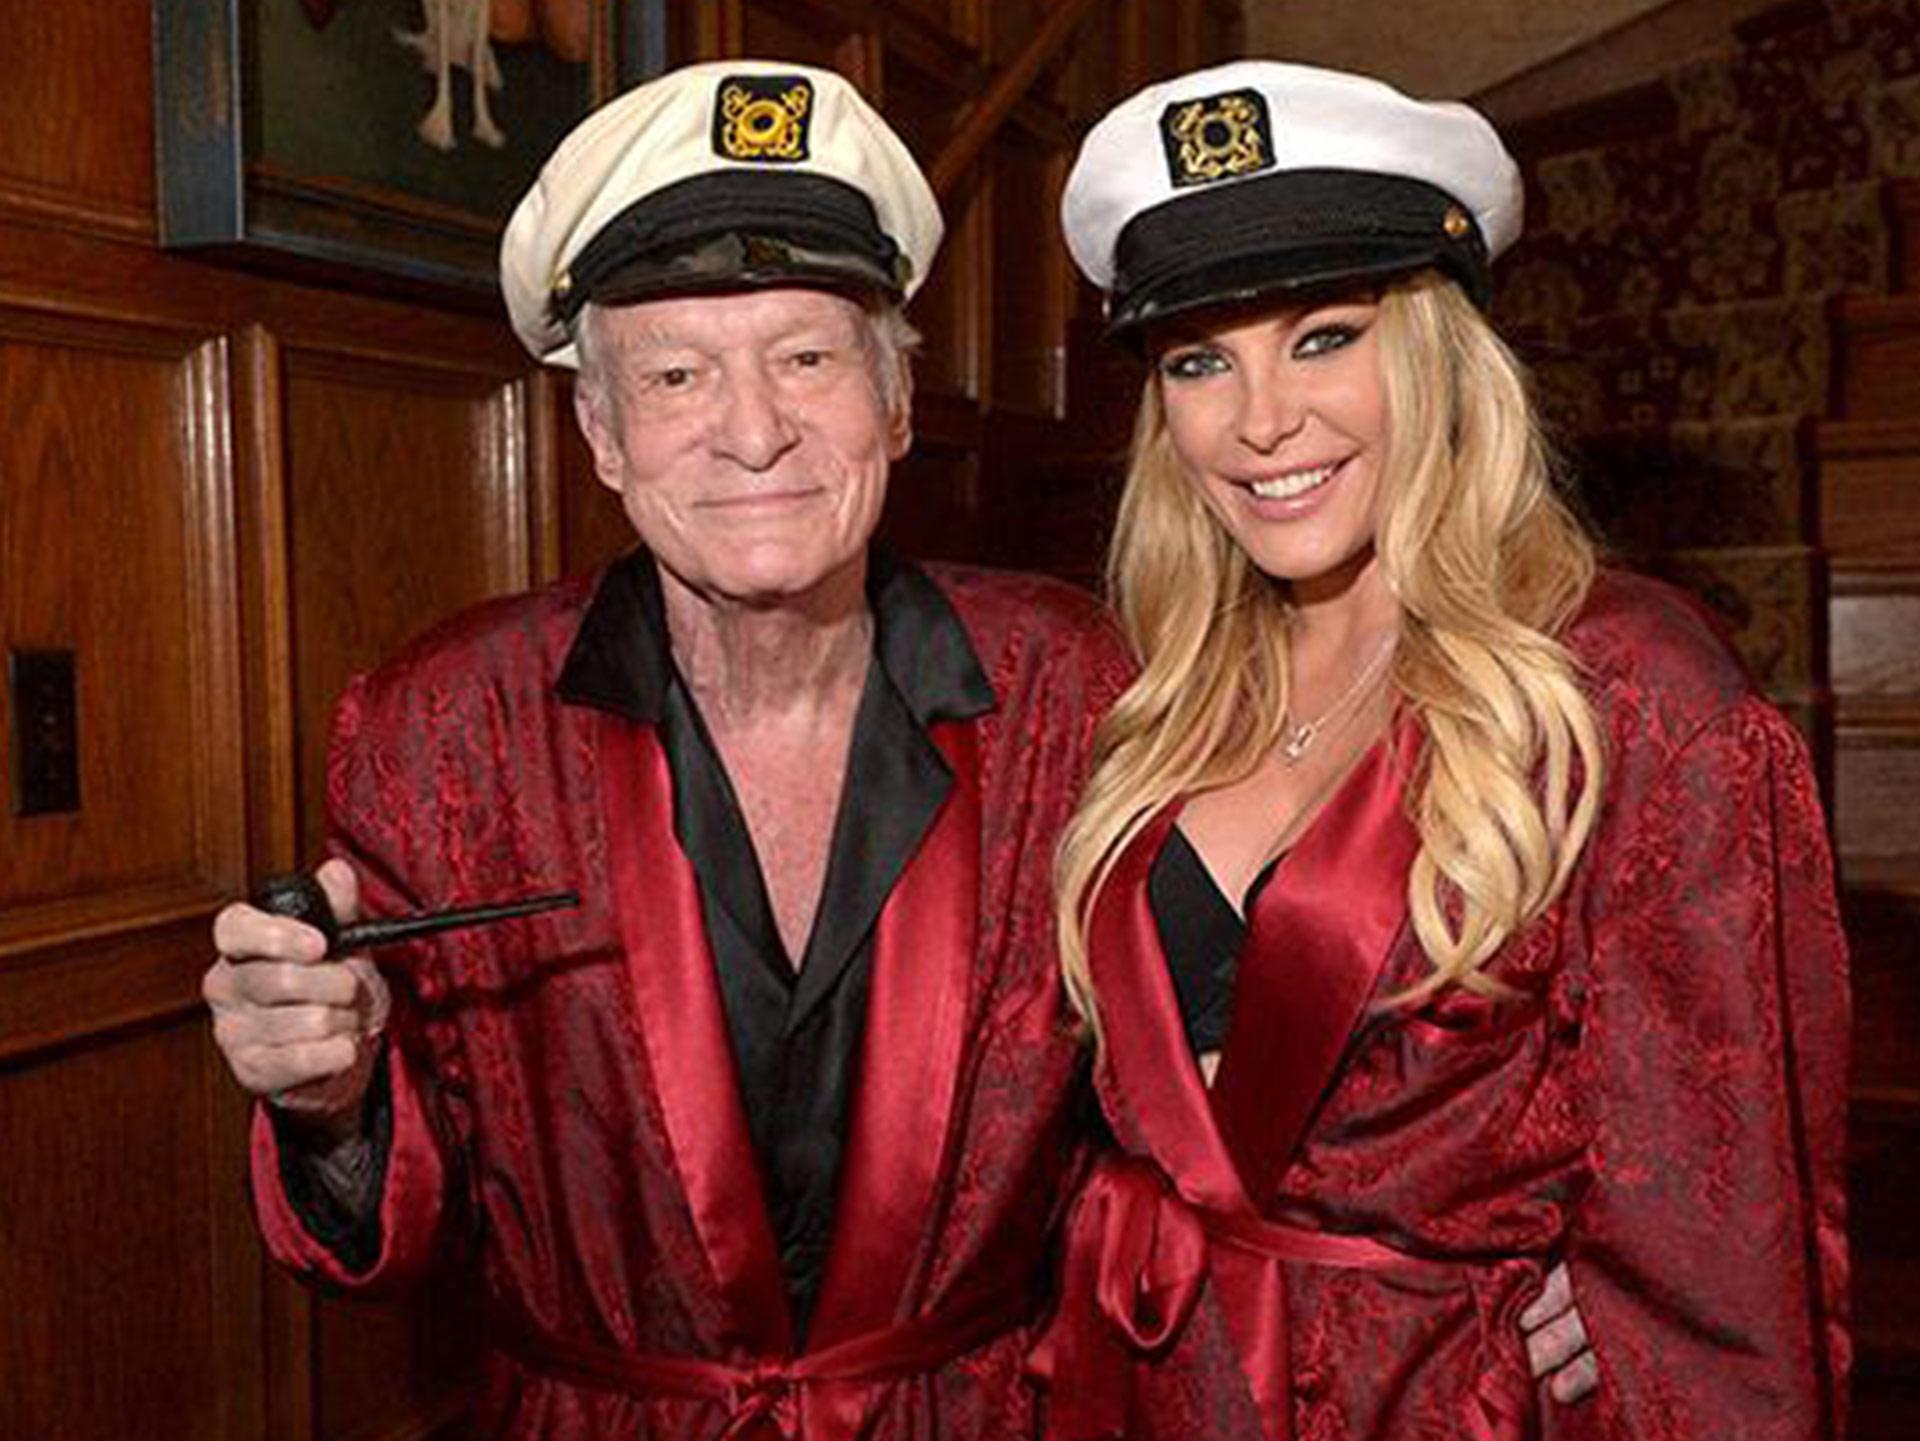 Hugh Hefner’s wife Crystal Harris will inherit nothing after being left out of his will